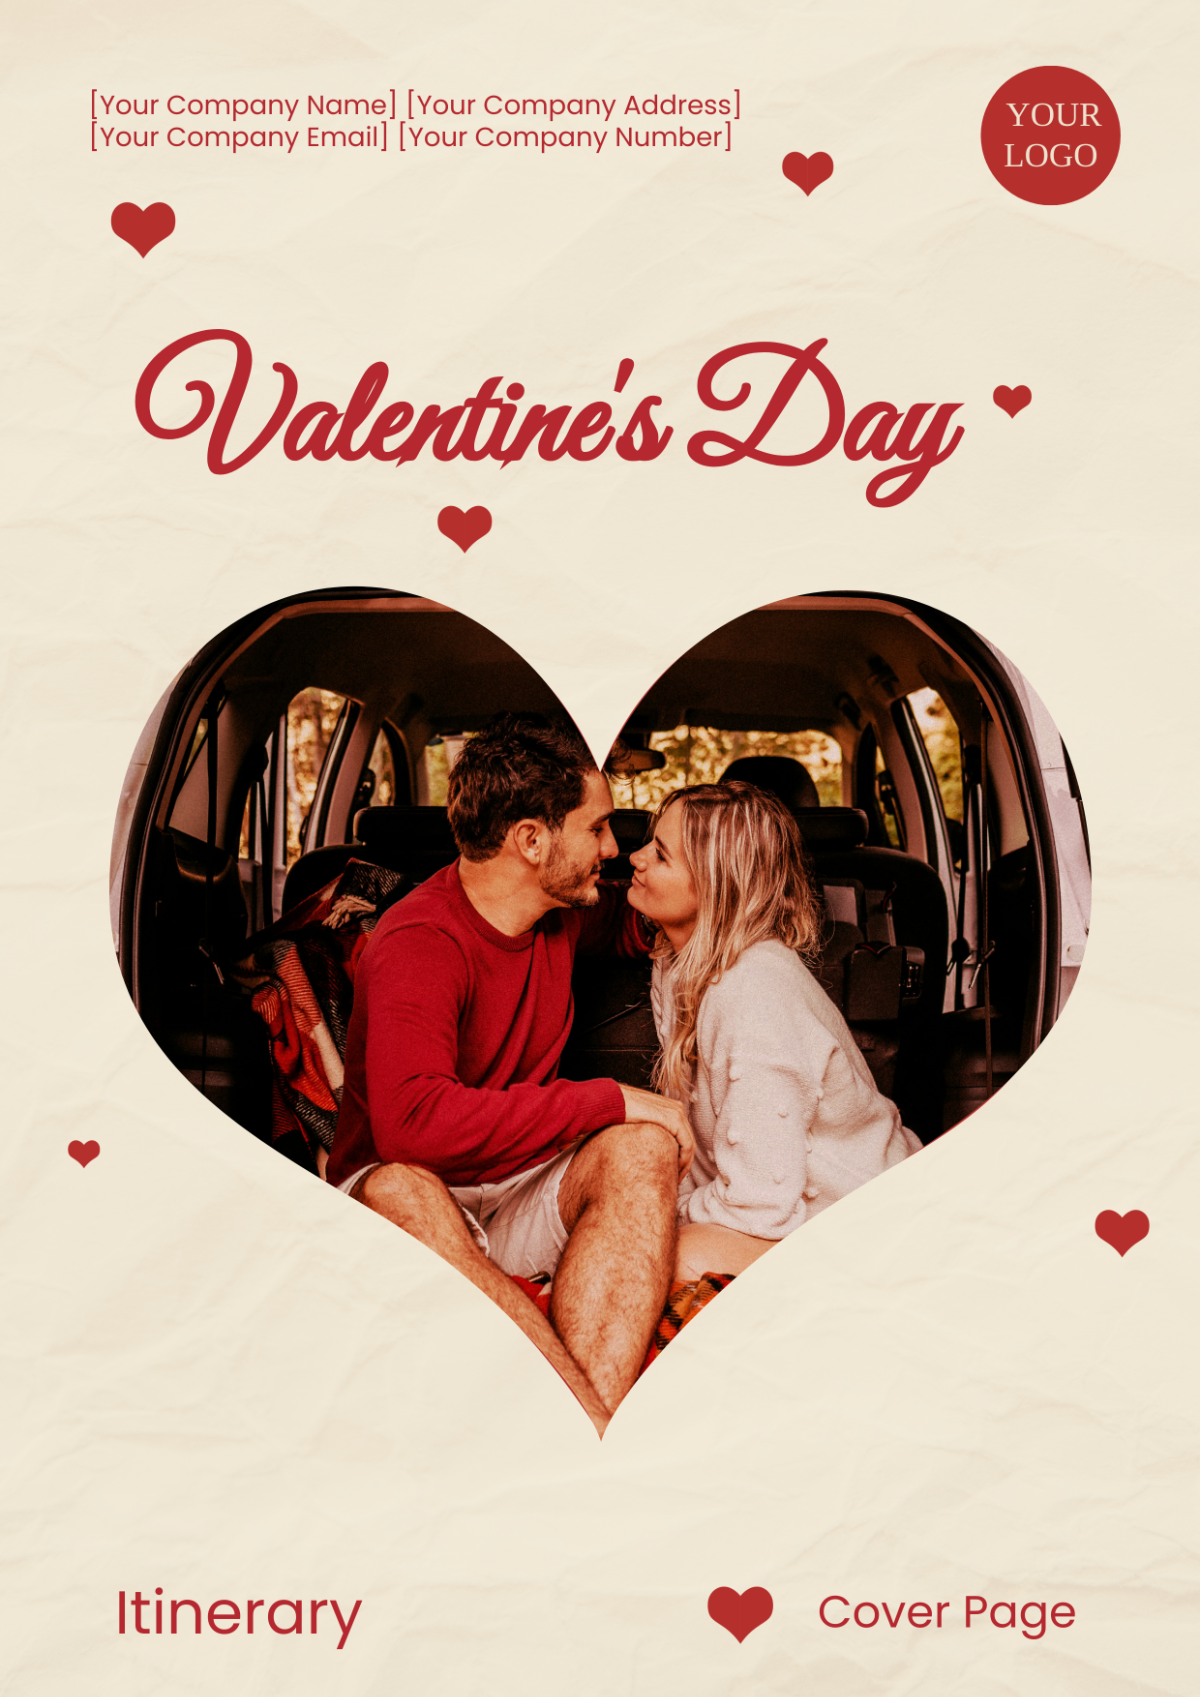 Valentine's Day Itinerary Cover Page